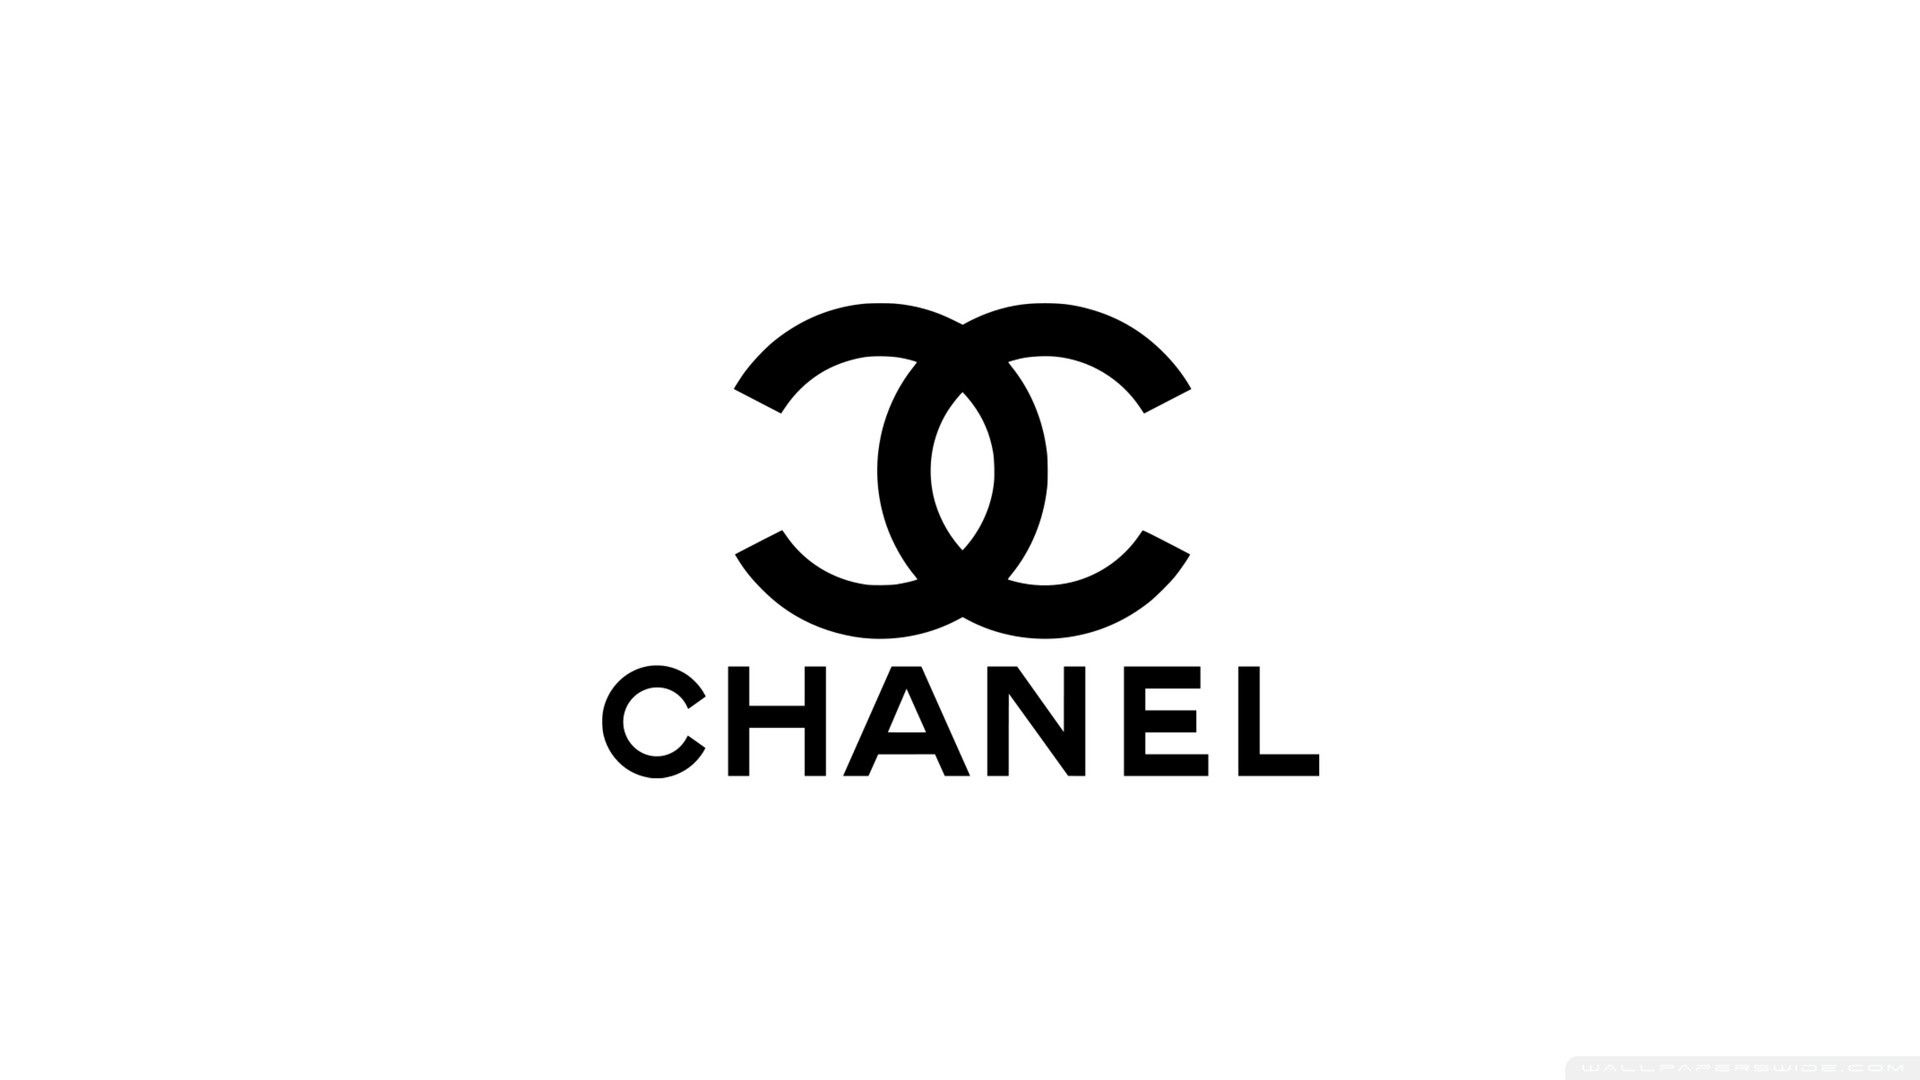 Download Chanel Wallpaper Hd, HD Background Download